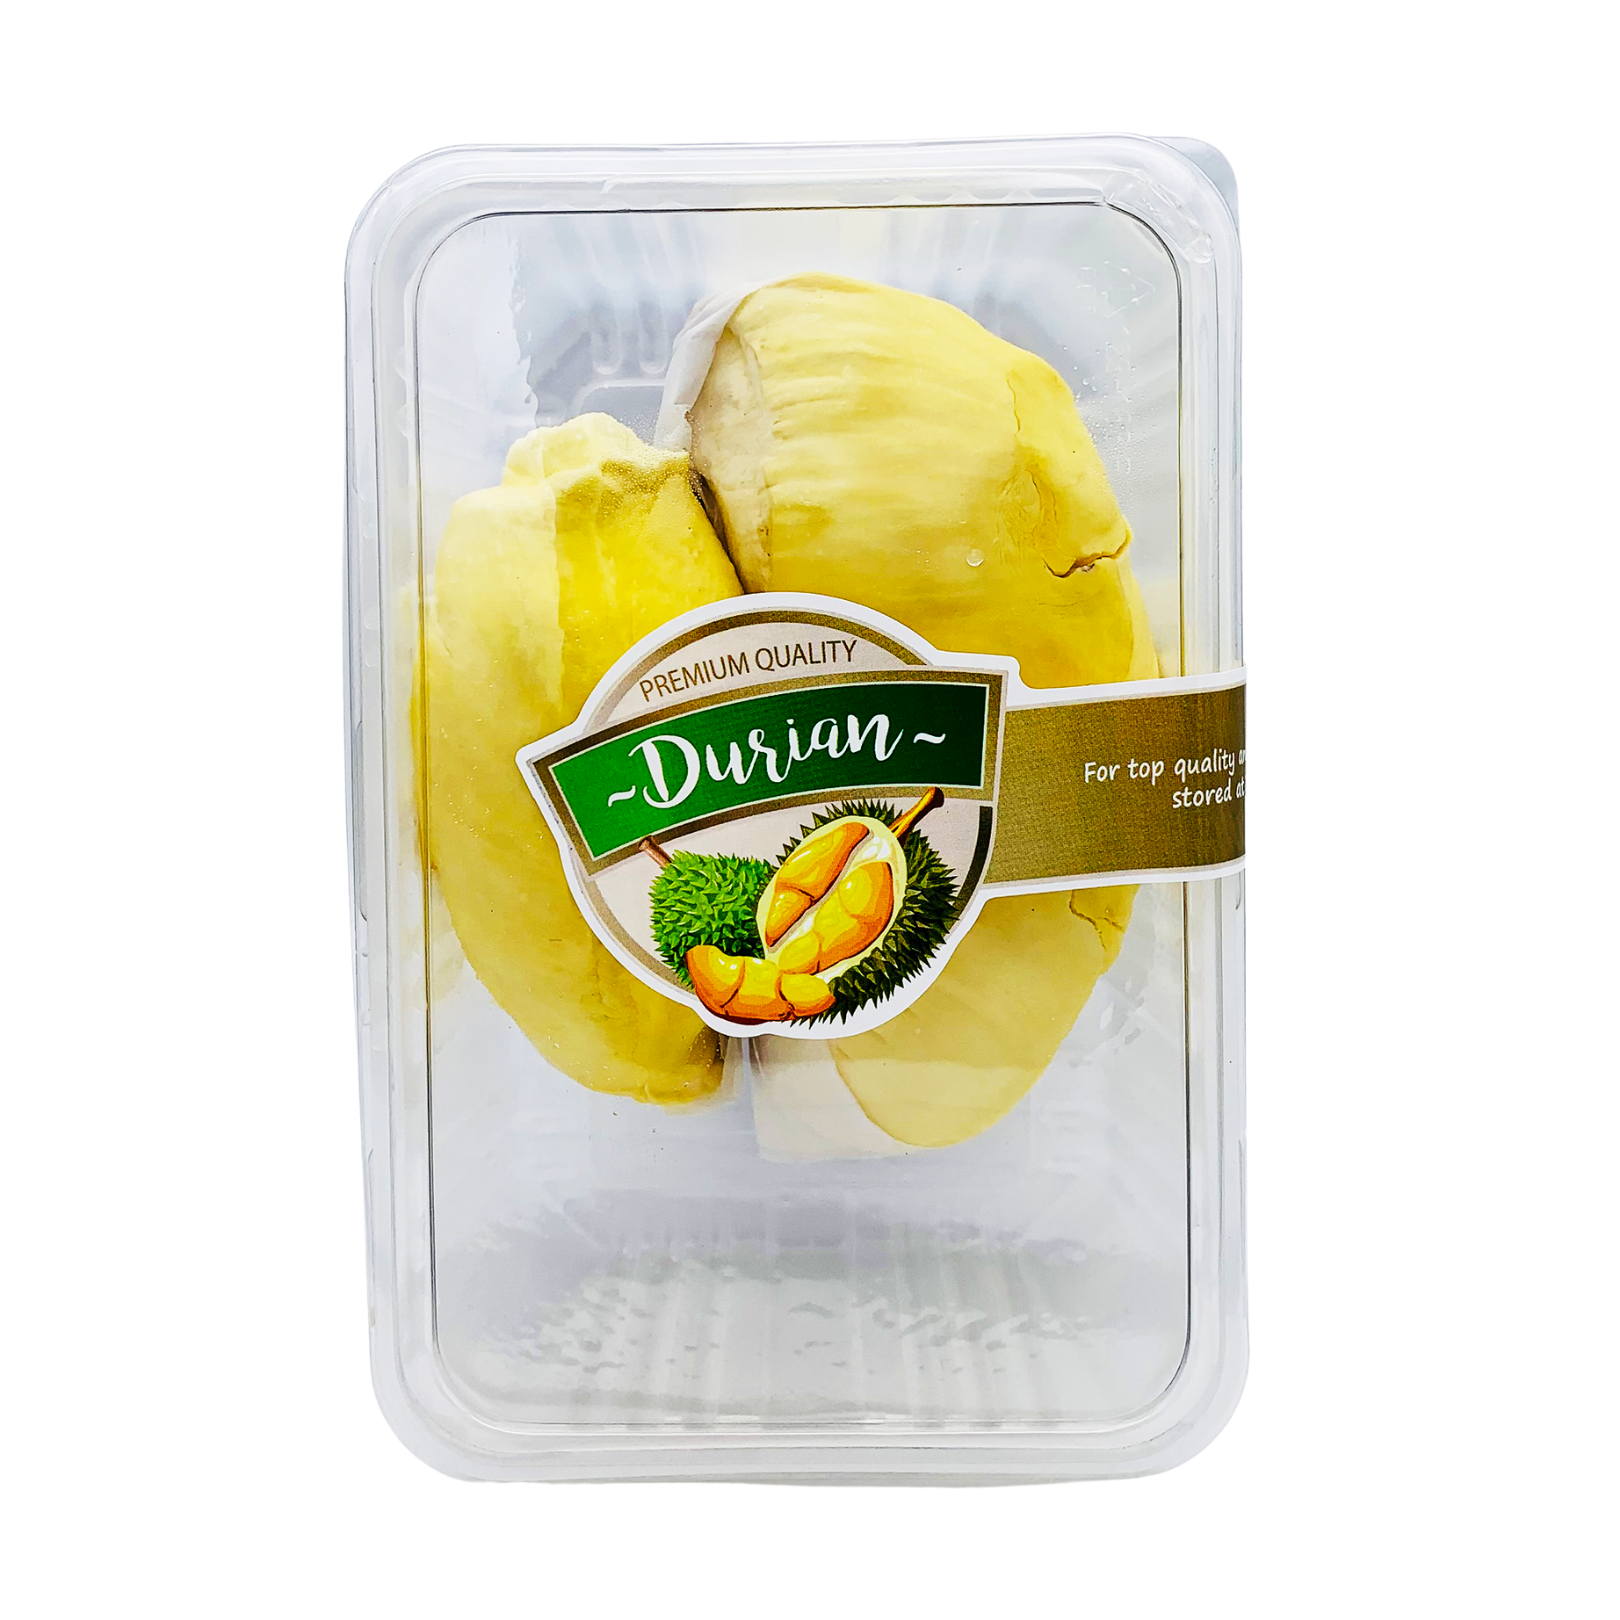 Fresh Thai Durian Monthong Fruit 400g Pre Packed - Imported from Thailand